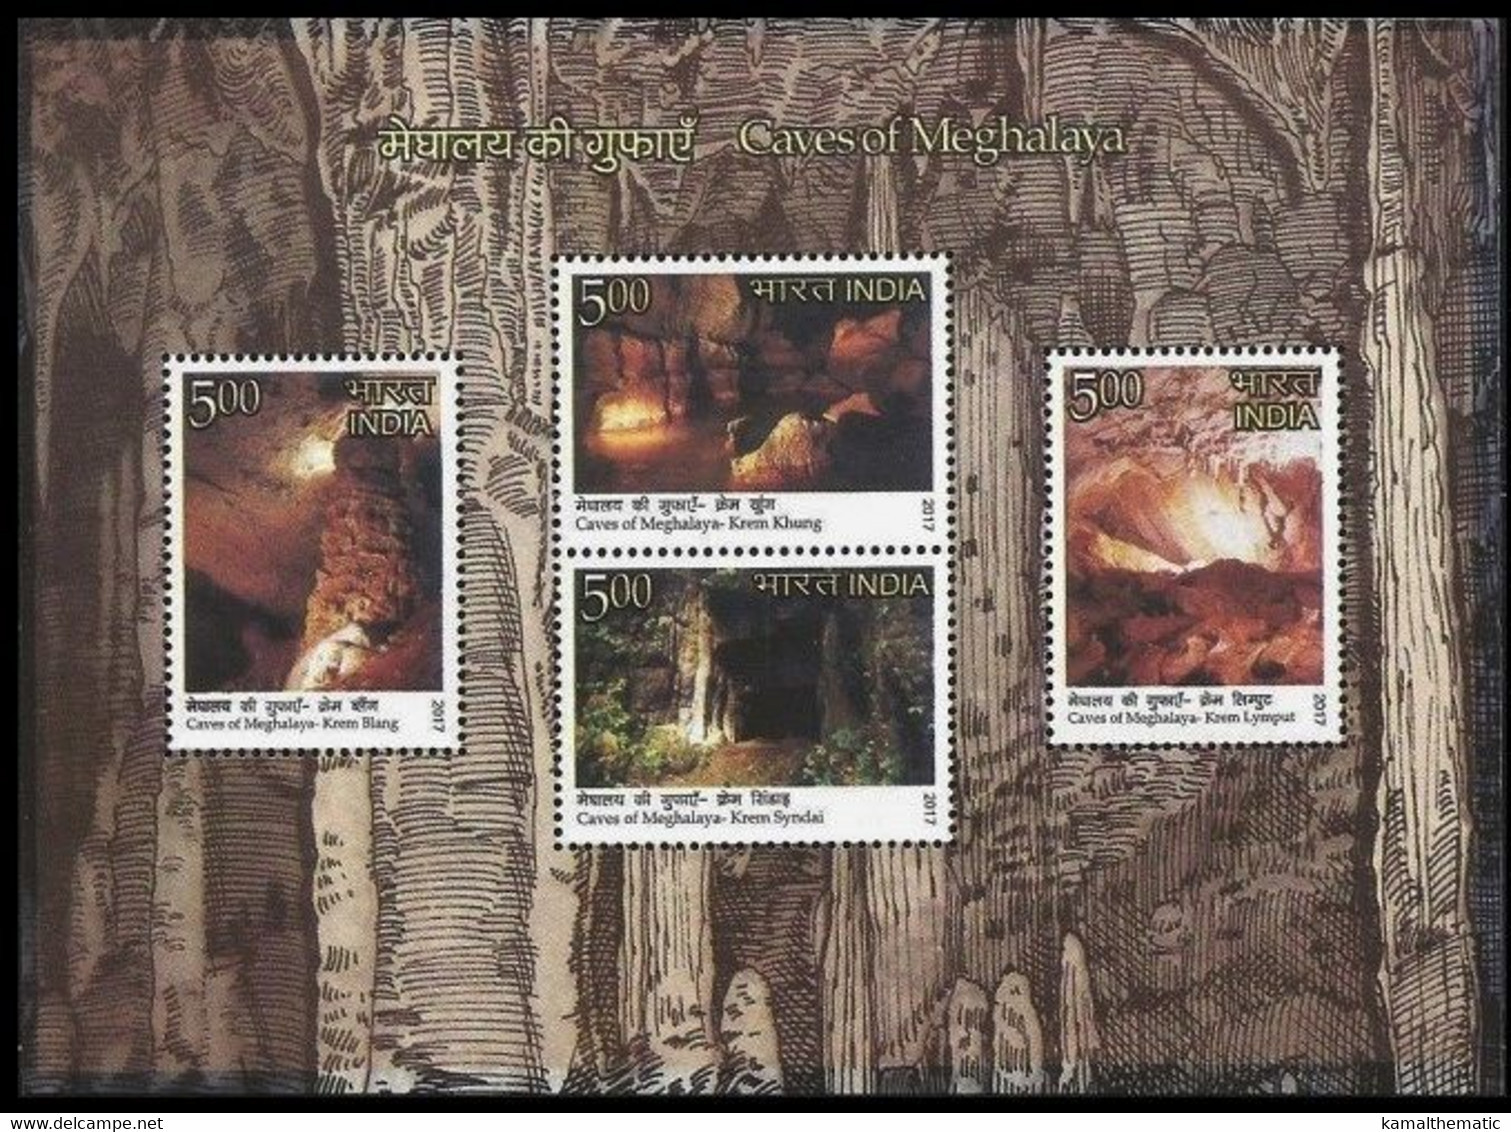 India 2017 MNH SS, Caves Of Meghalaya, Longest Caves In The World - Archaeology